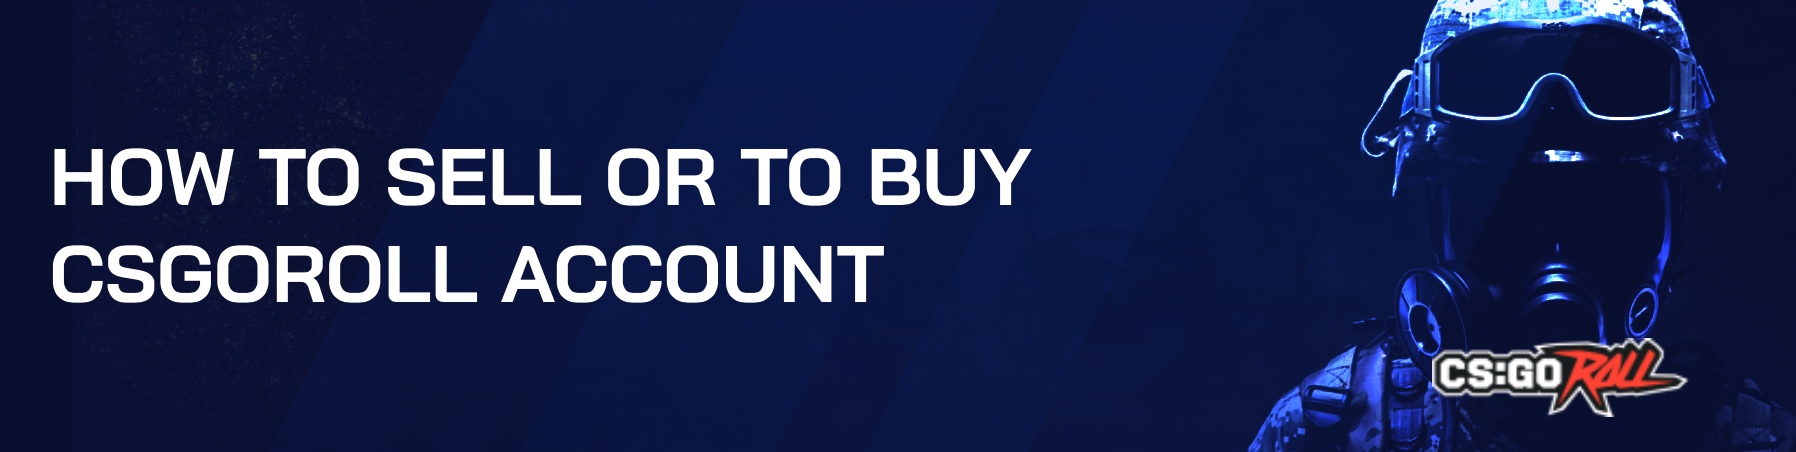 How to sell or to buy CSGORoll account